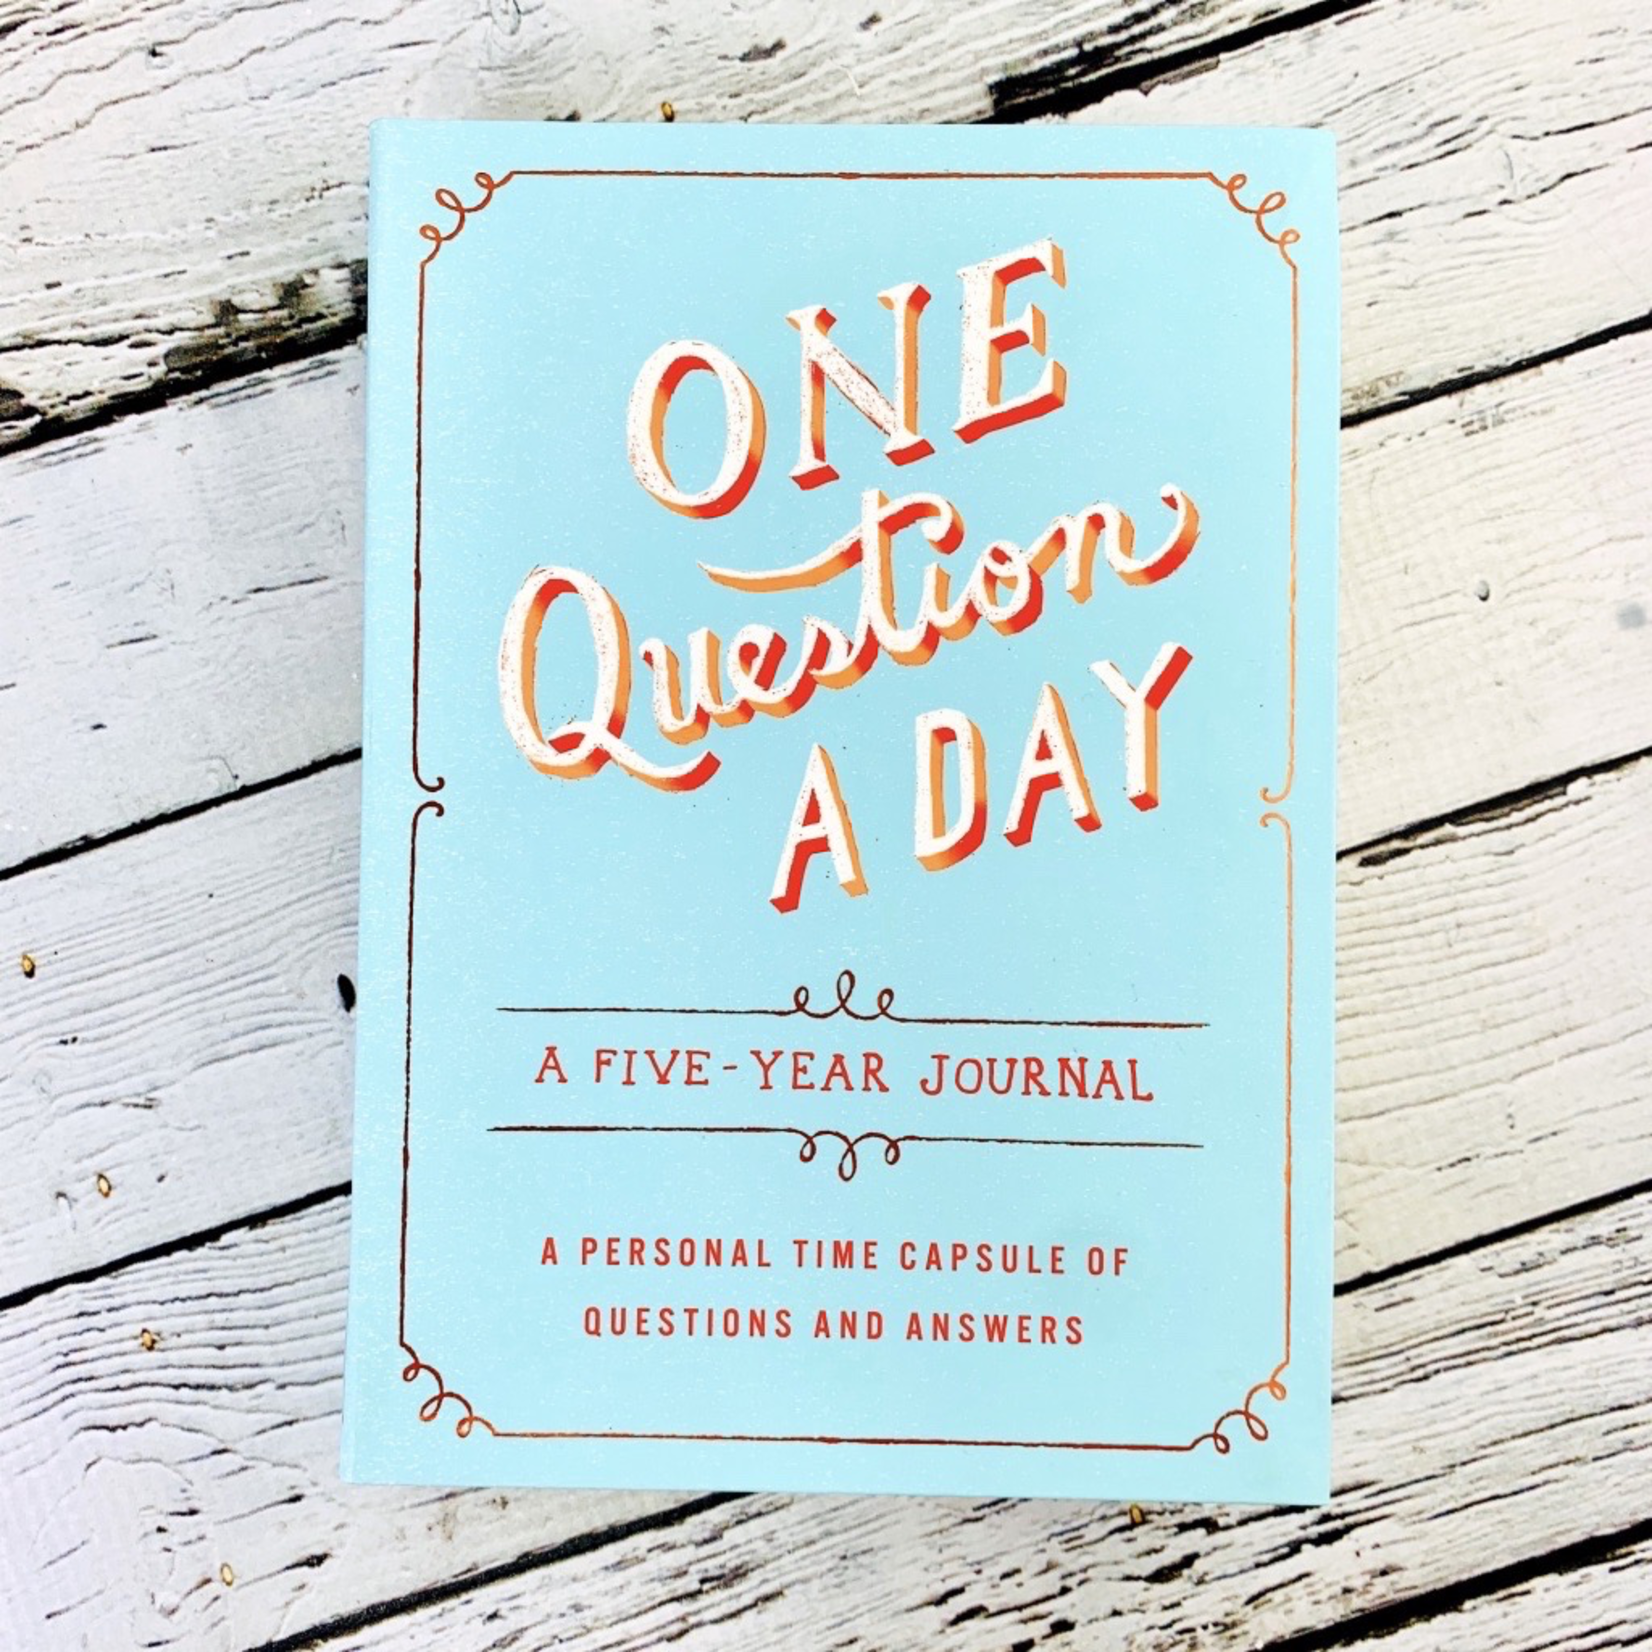 One Question a Day A Five-Year Journal